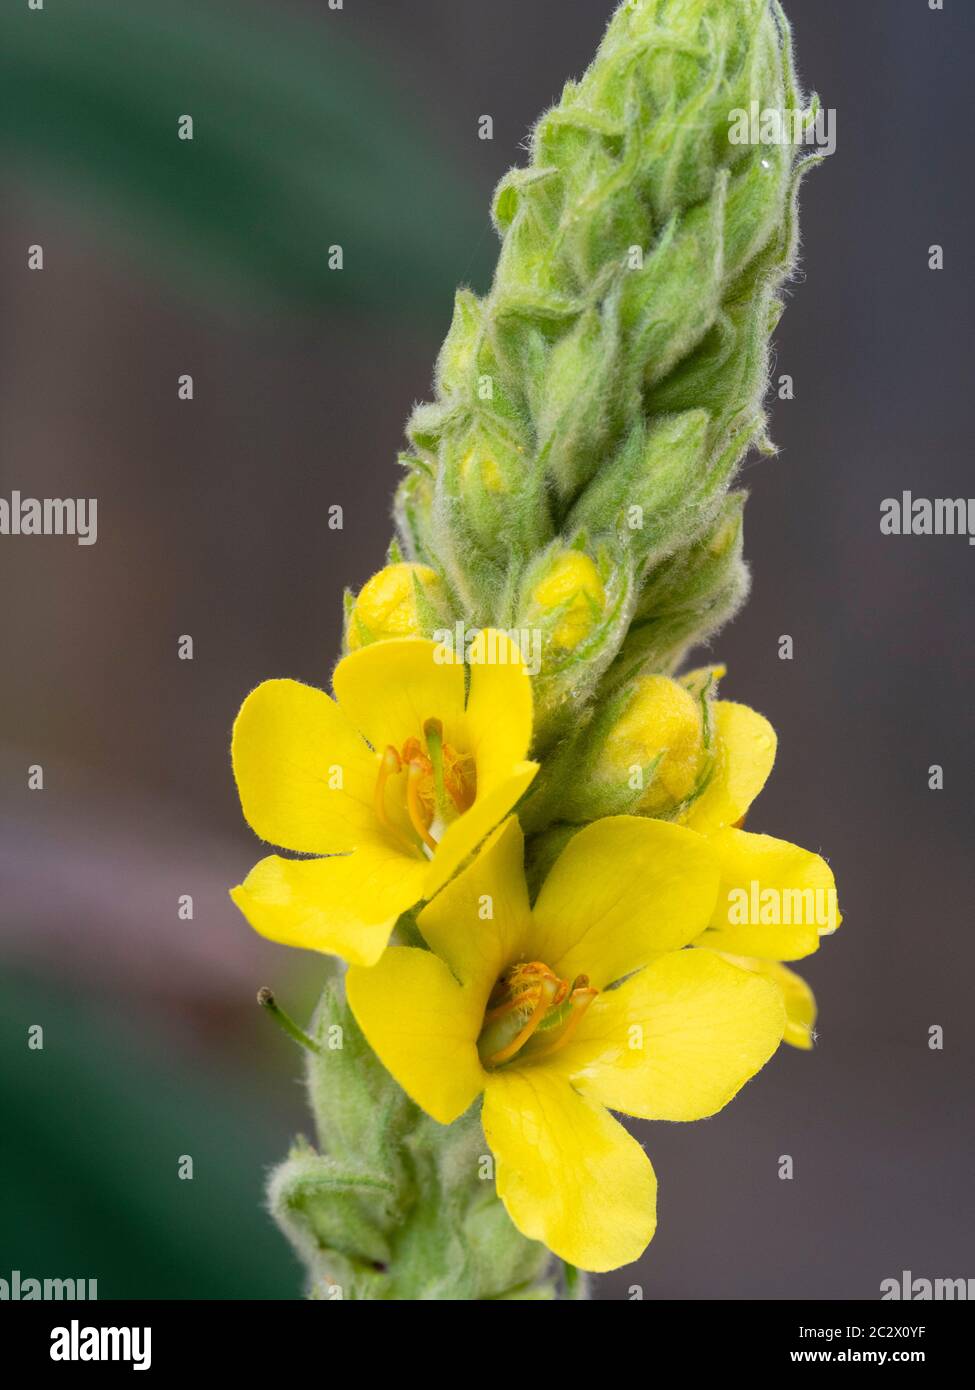 Yellow Summer Flowers In The Spike Of Common Mullein Verbascum Thapsus A Uk Wildflower Used In Herbal Medicine Stock Photo Alamy